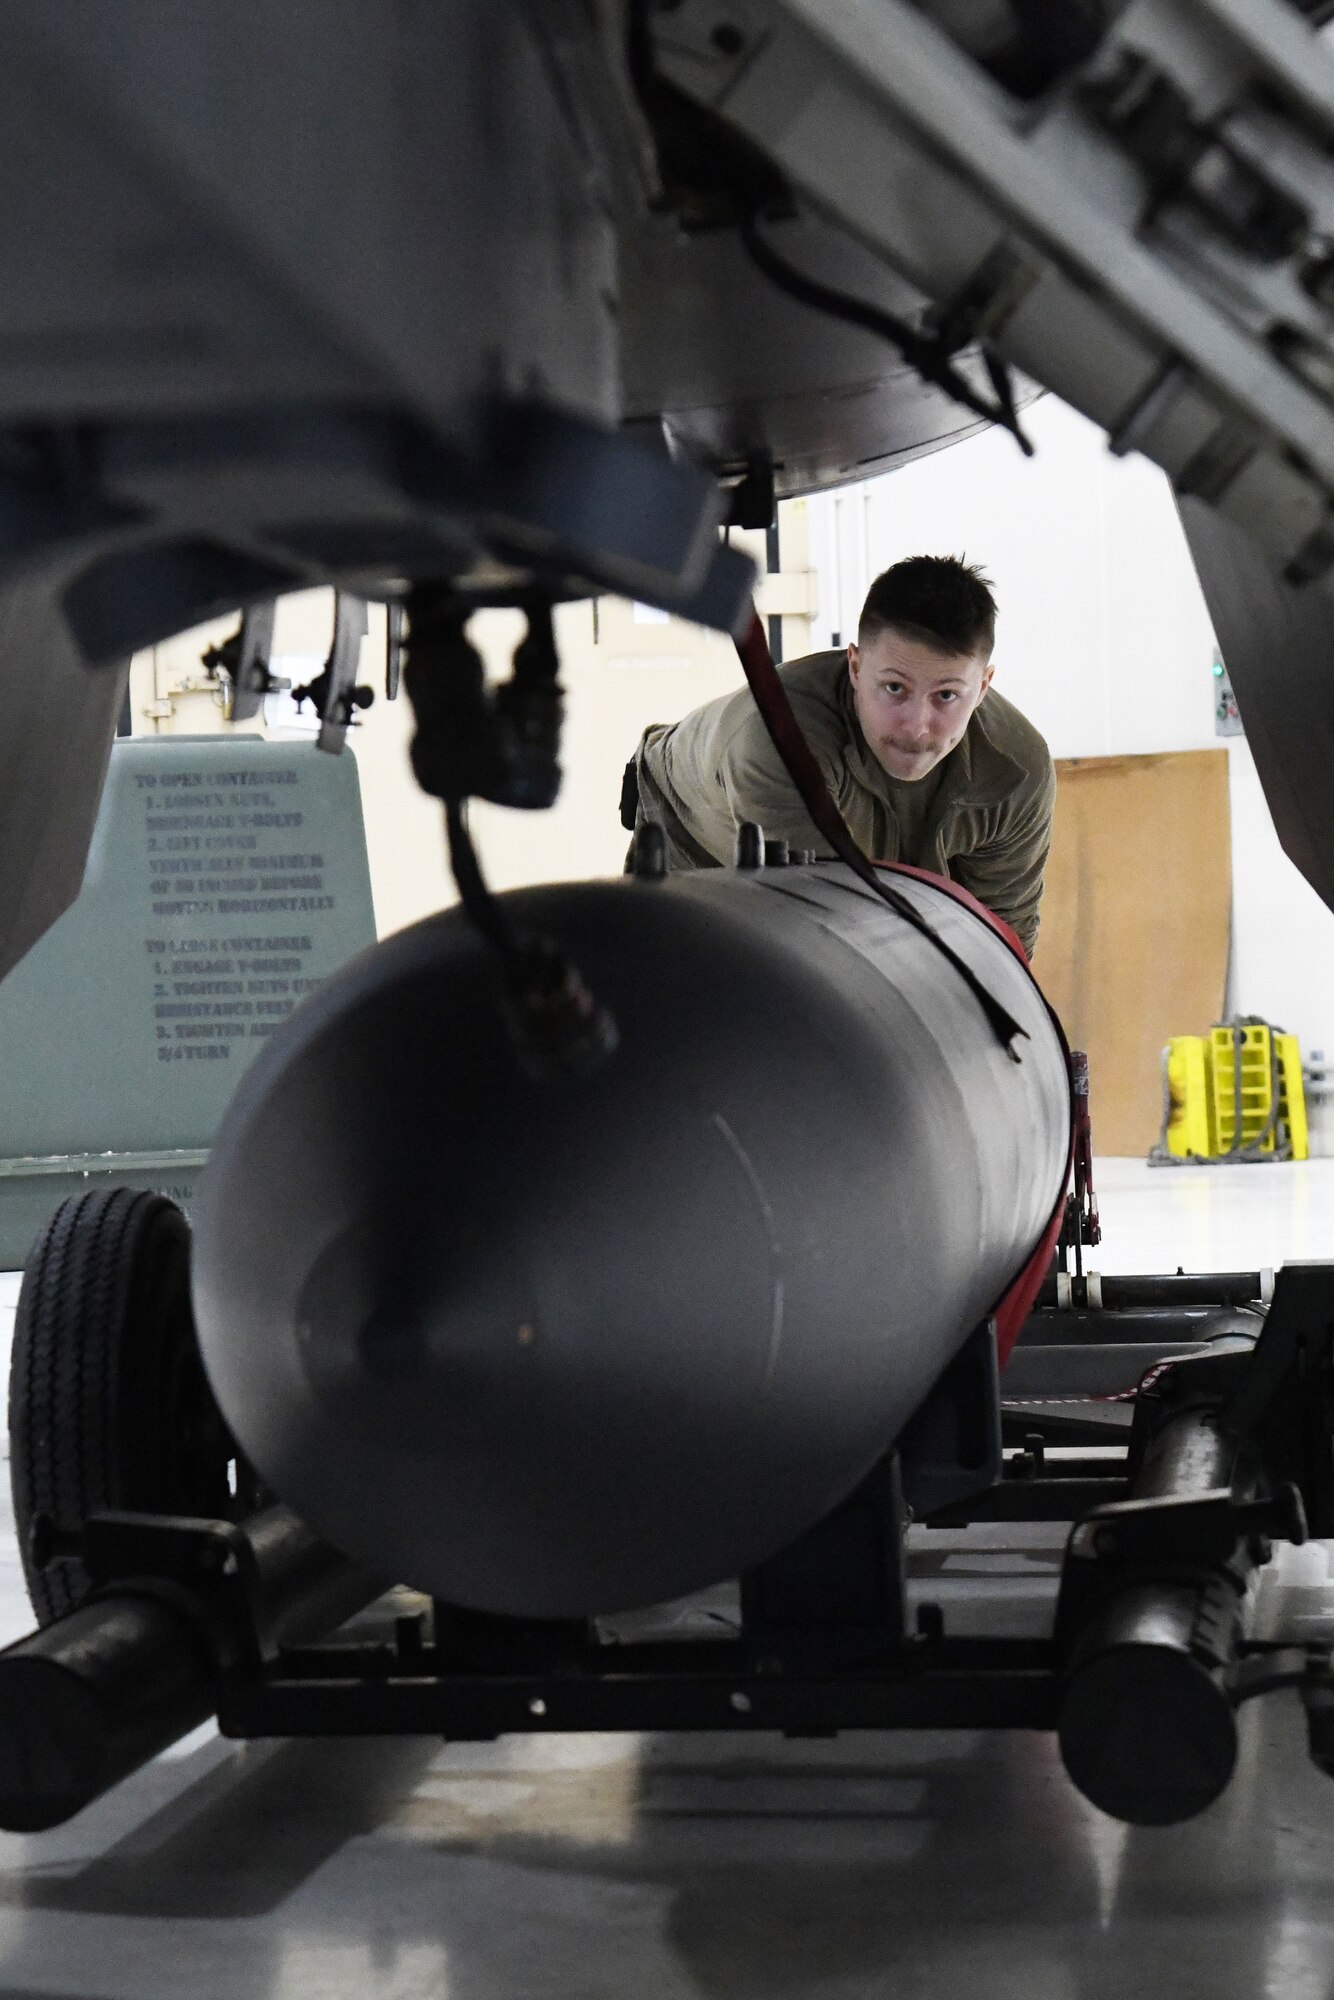 A fighter aircraft integrated avionics specialist assigned to the 148th Fighter Wing, Minnesota Air National Guard, prepares to install an AN/ASQ-236 radar pod Jan. 25, 2023.  The 148th Fighter Wing has been designated as the Air National Guard’s Center for Excellence for all F-16 fighter aircraft.